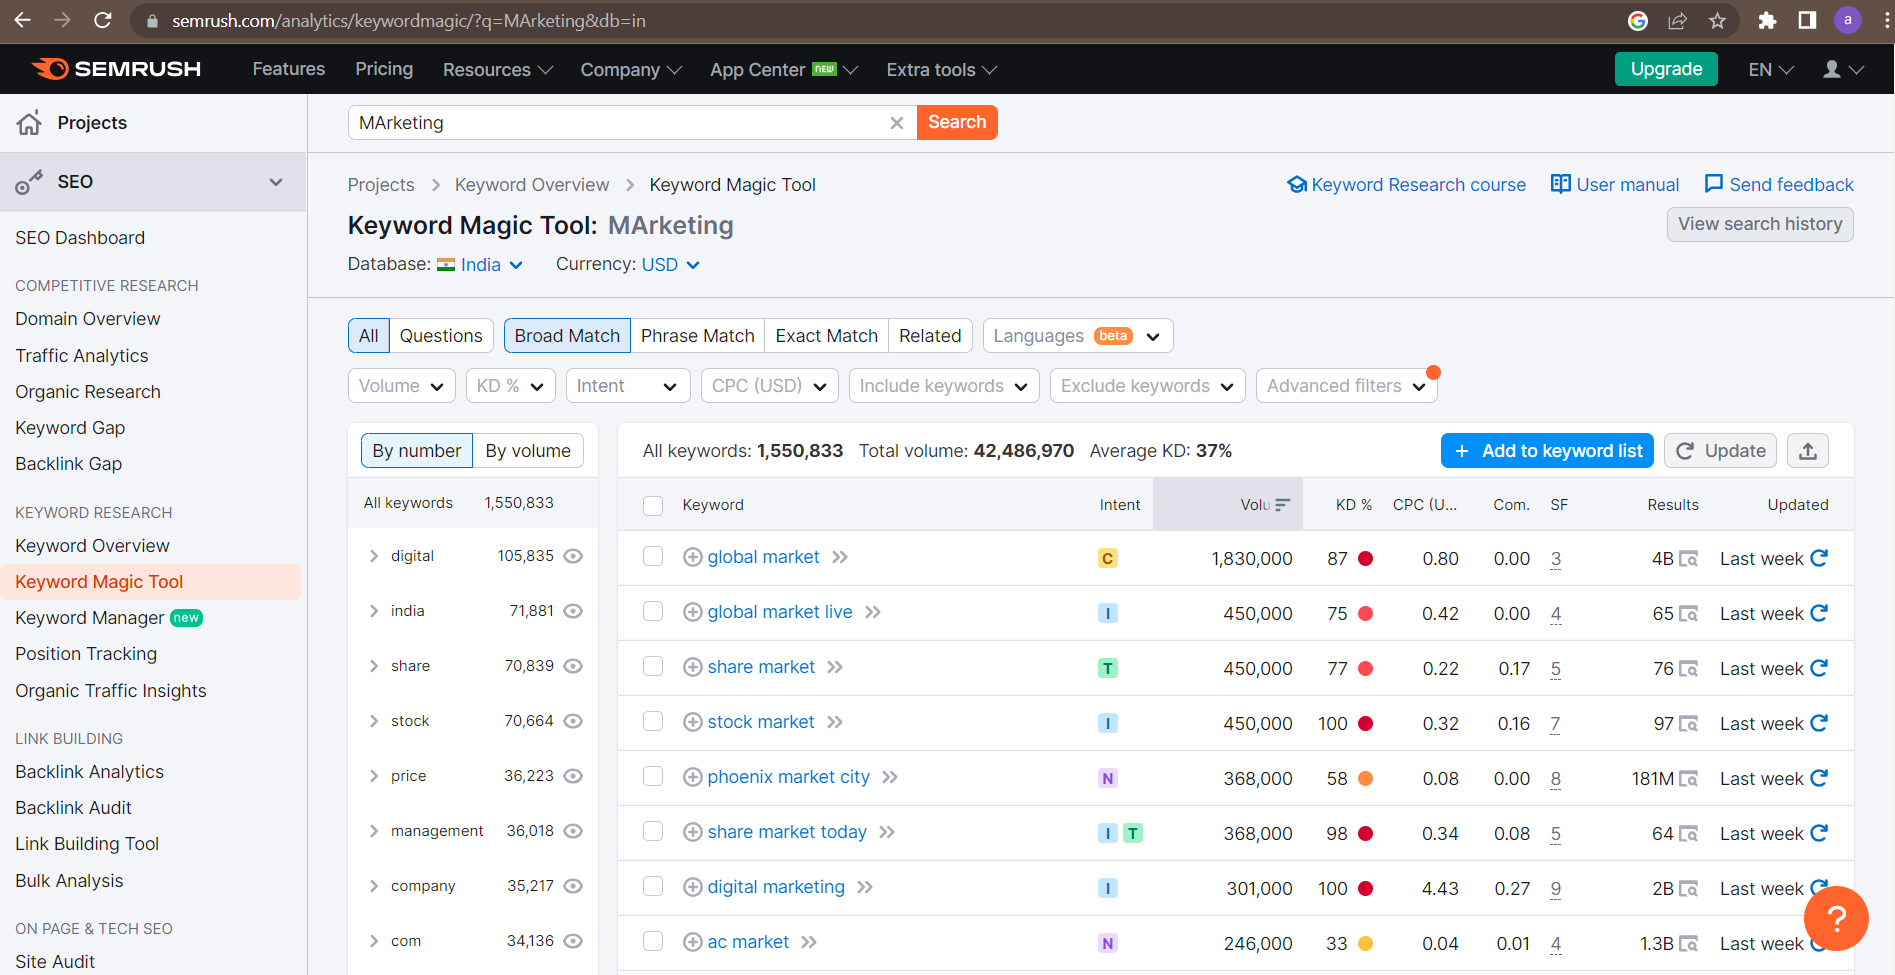 Result page for SEMRUSH